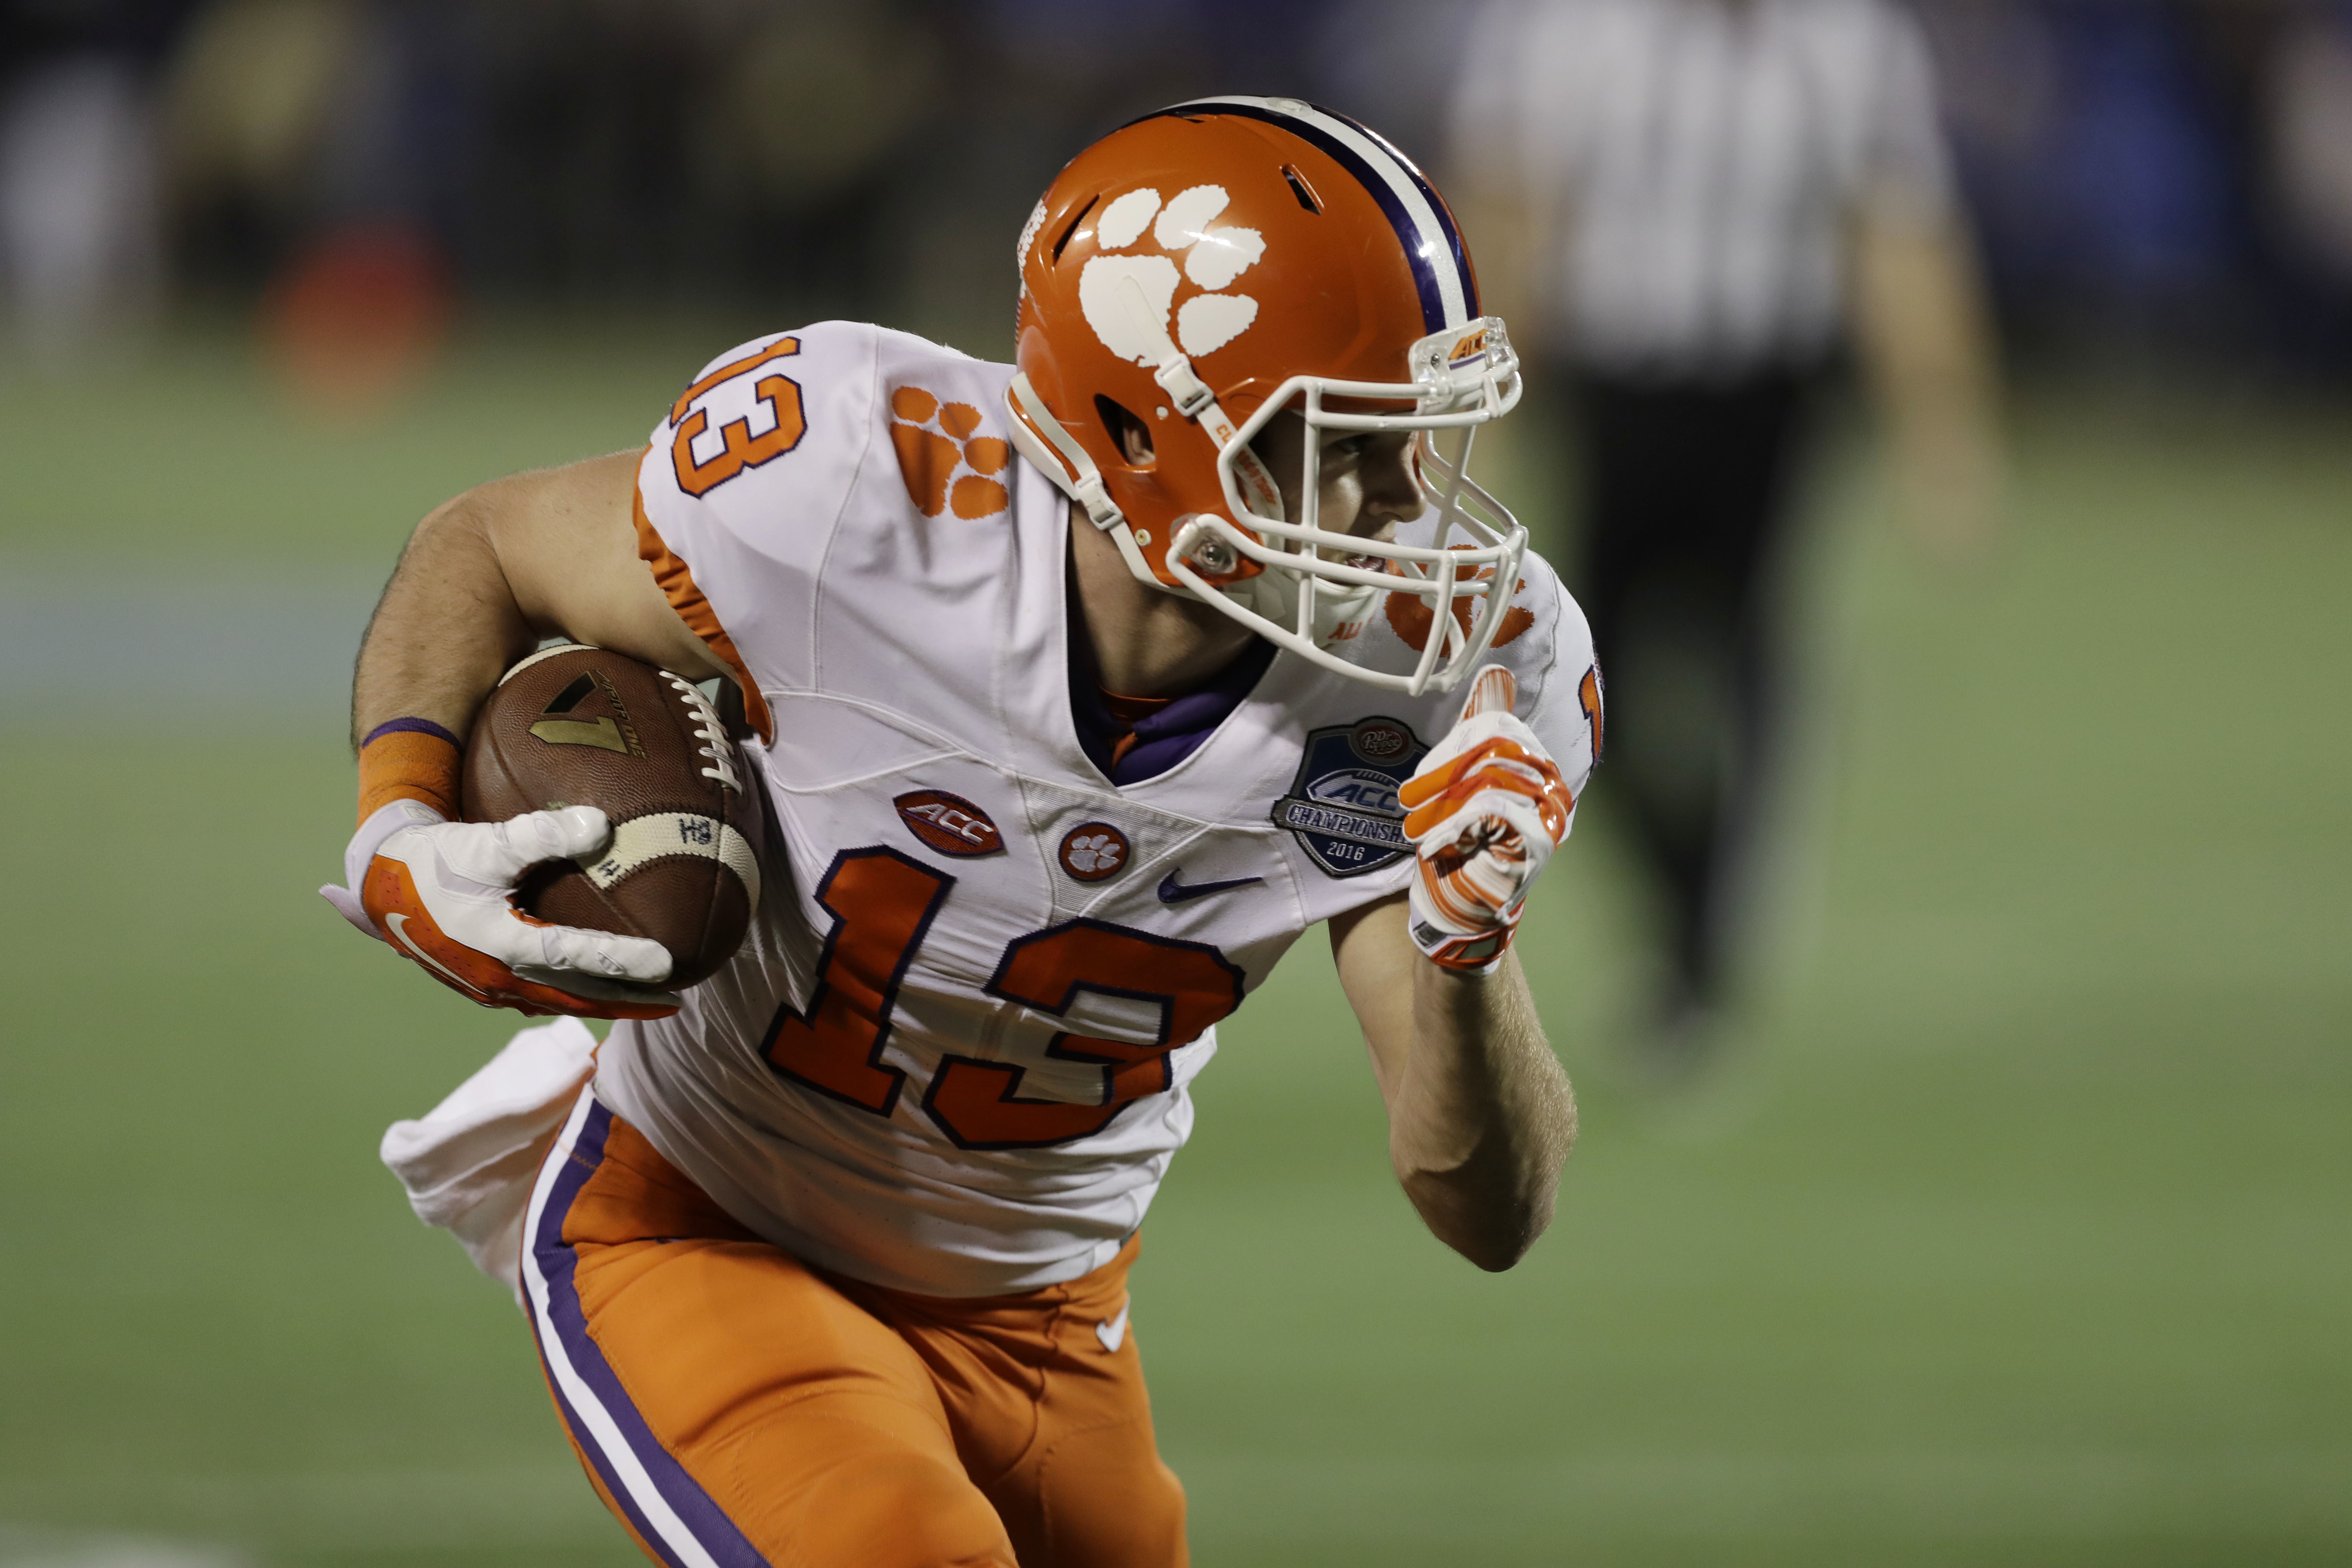 Hunter Renfrow selected to 2022 Pro Bowl in Las Vegas